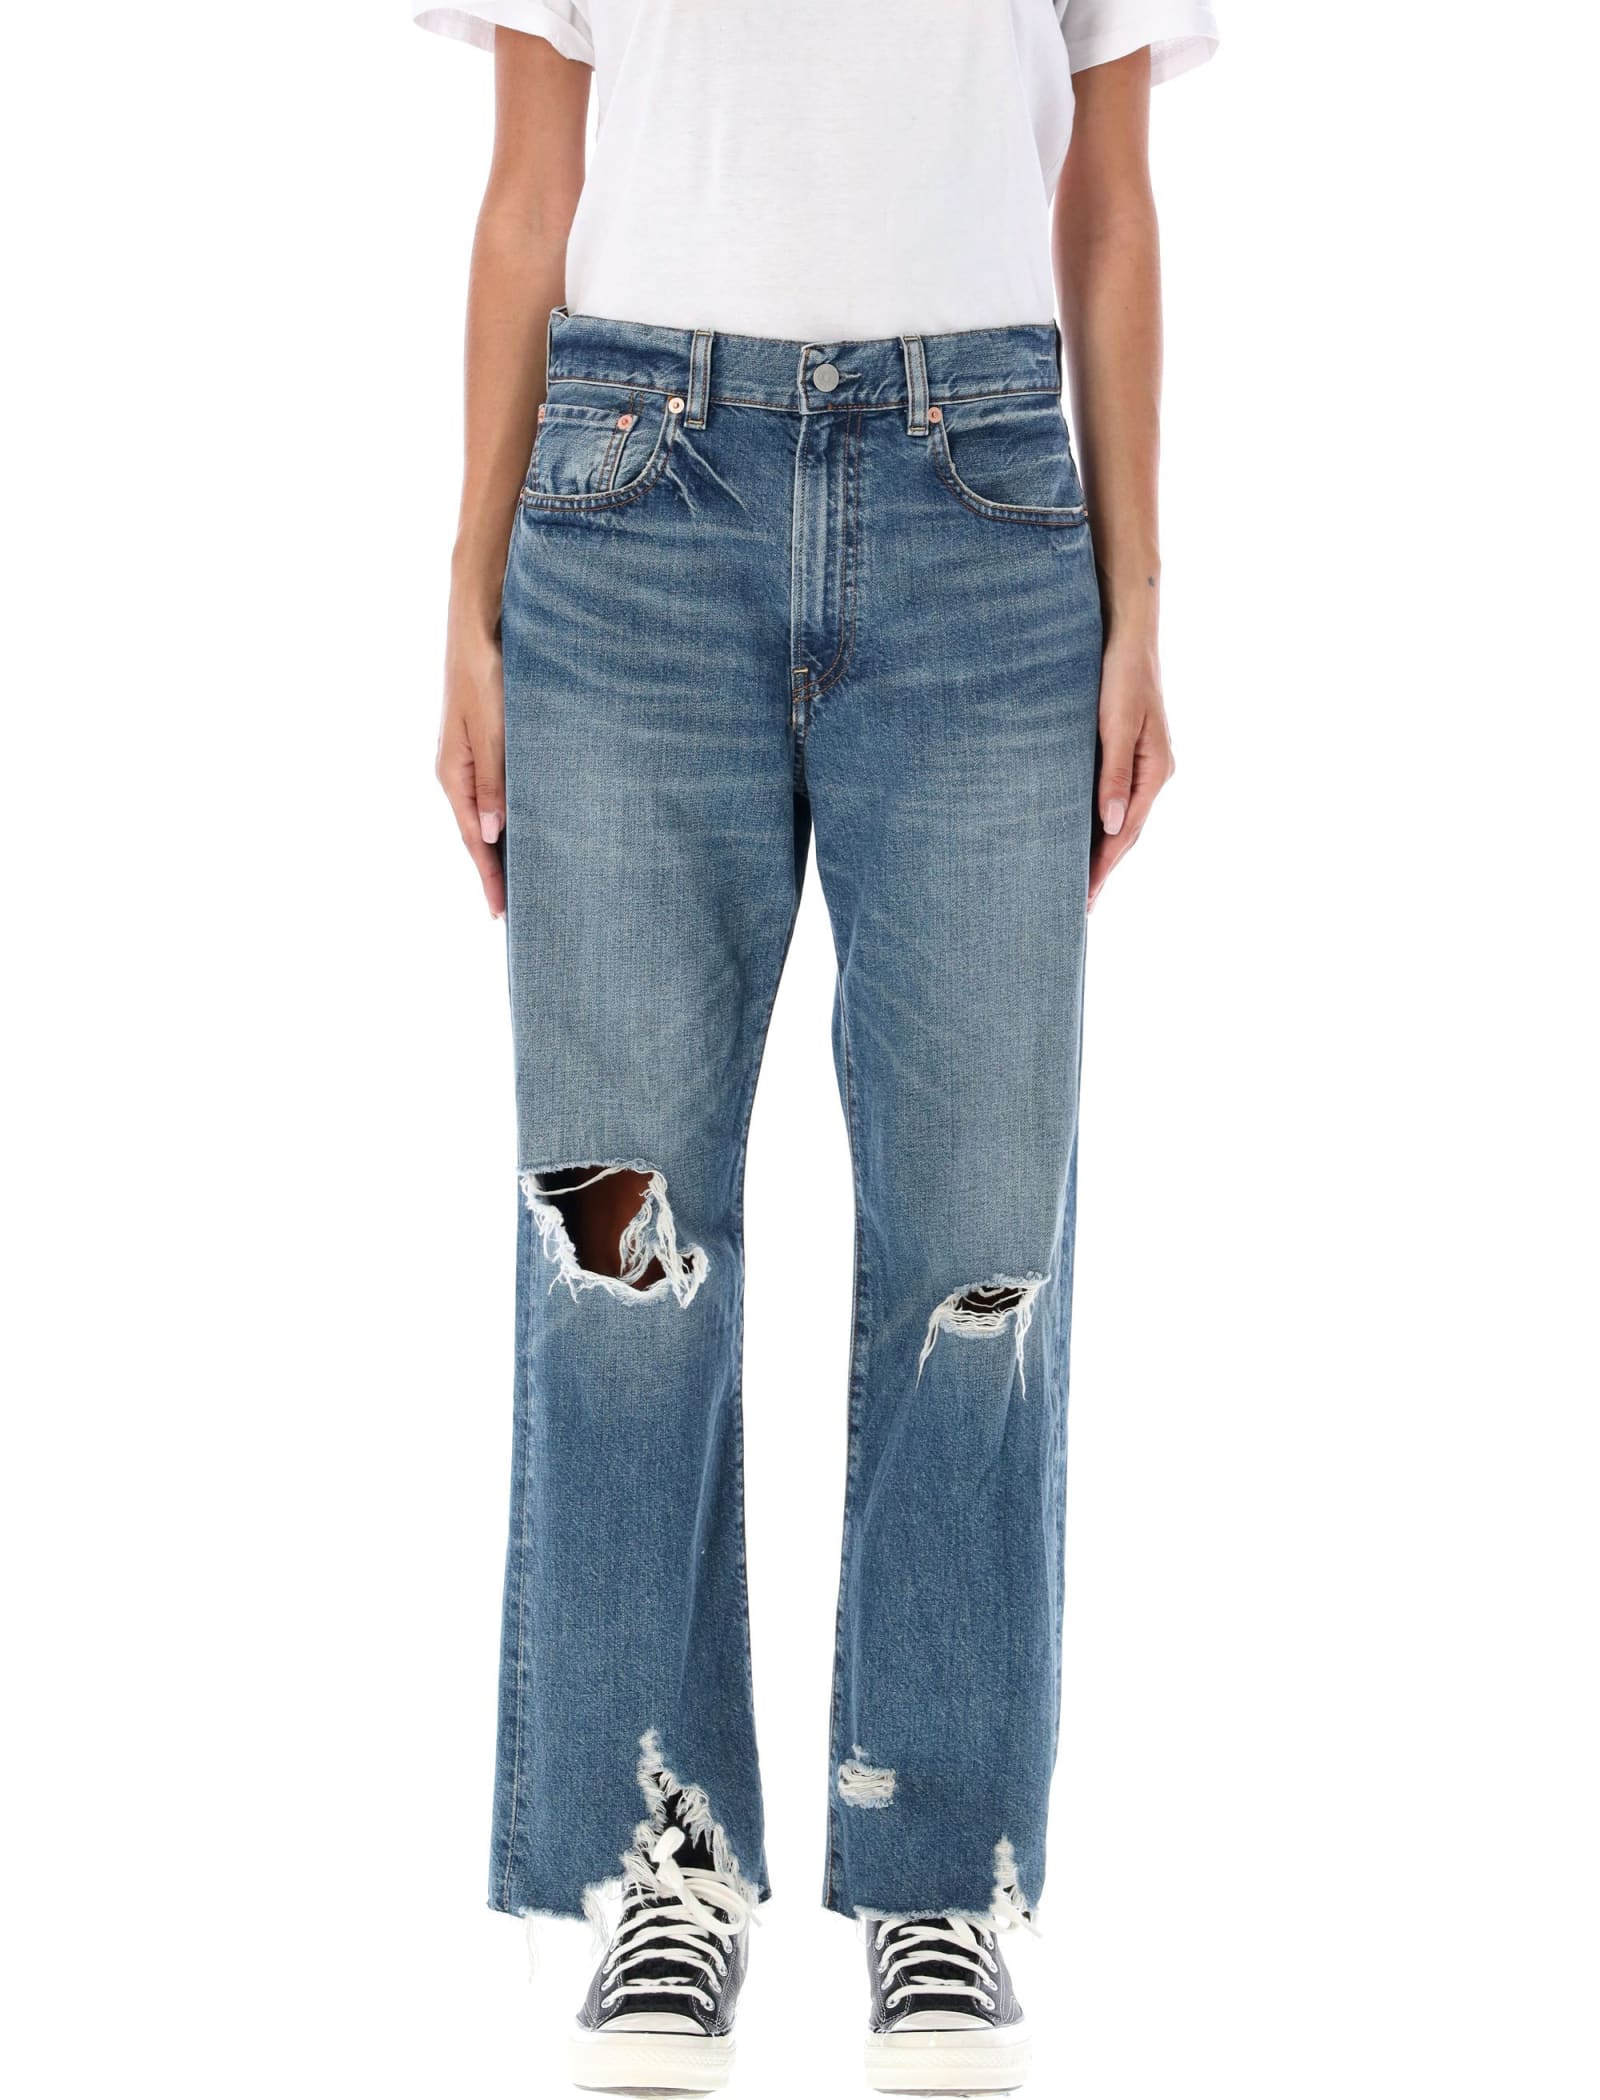 Denimist Lucy Bf Jeans